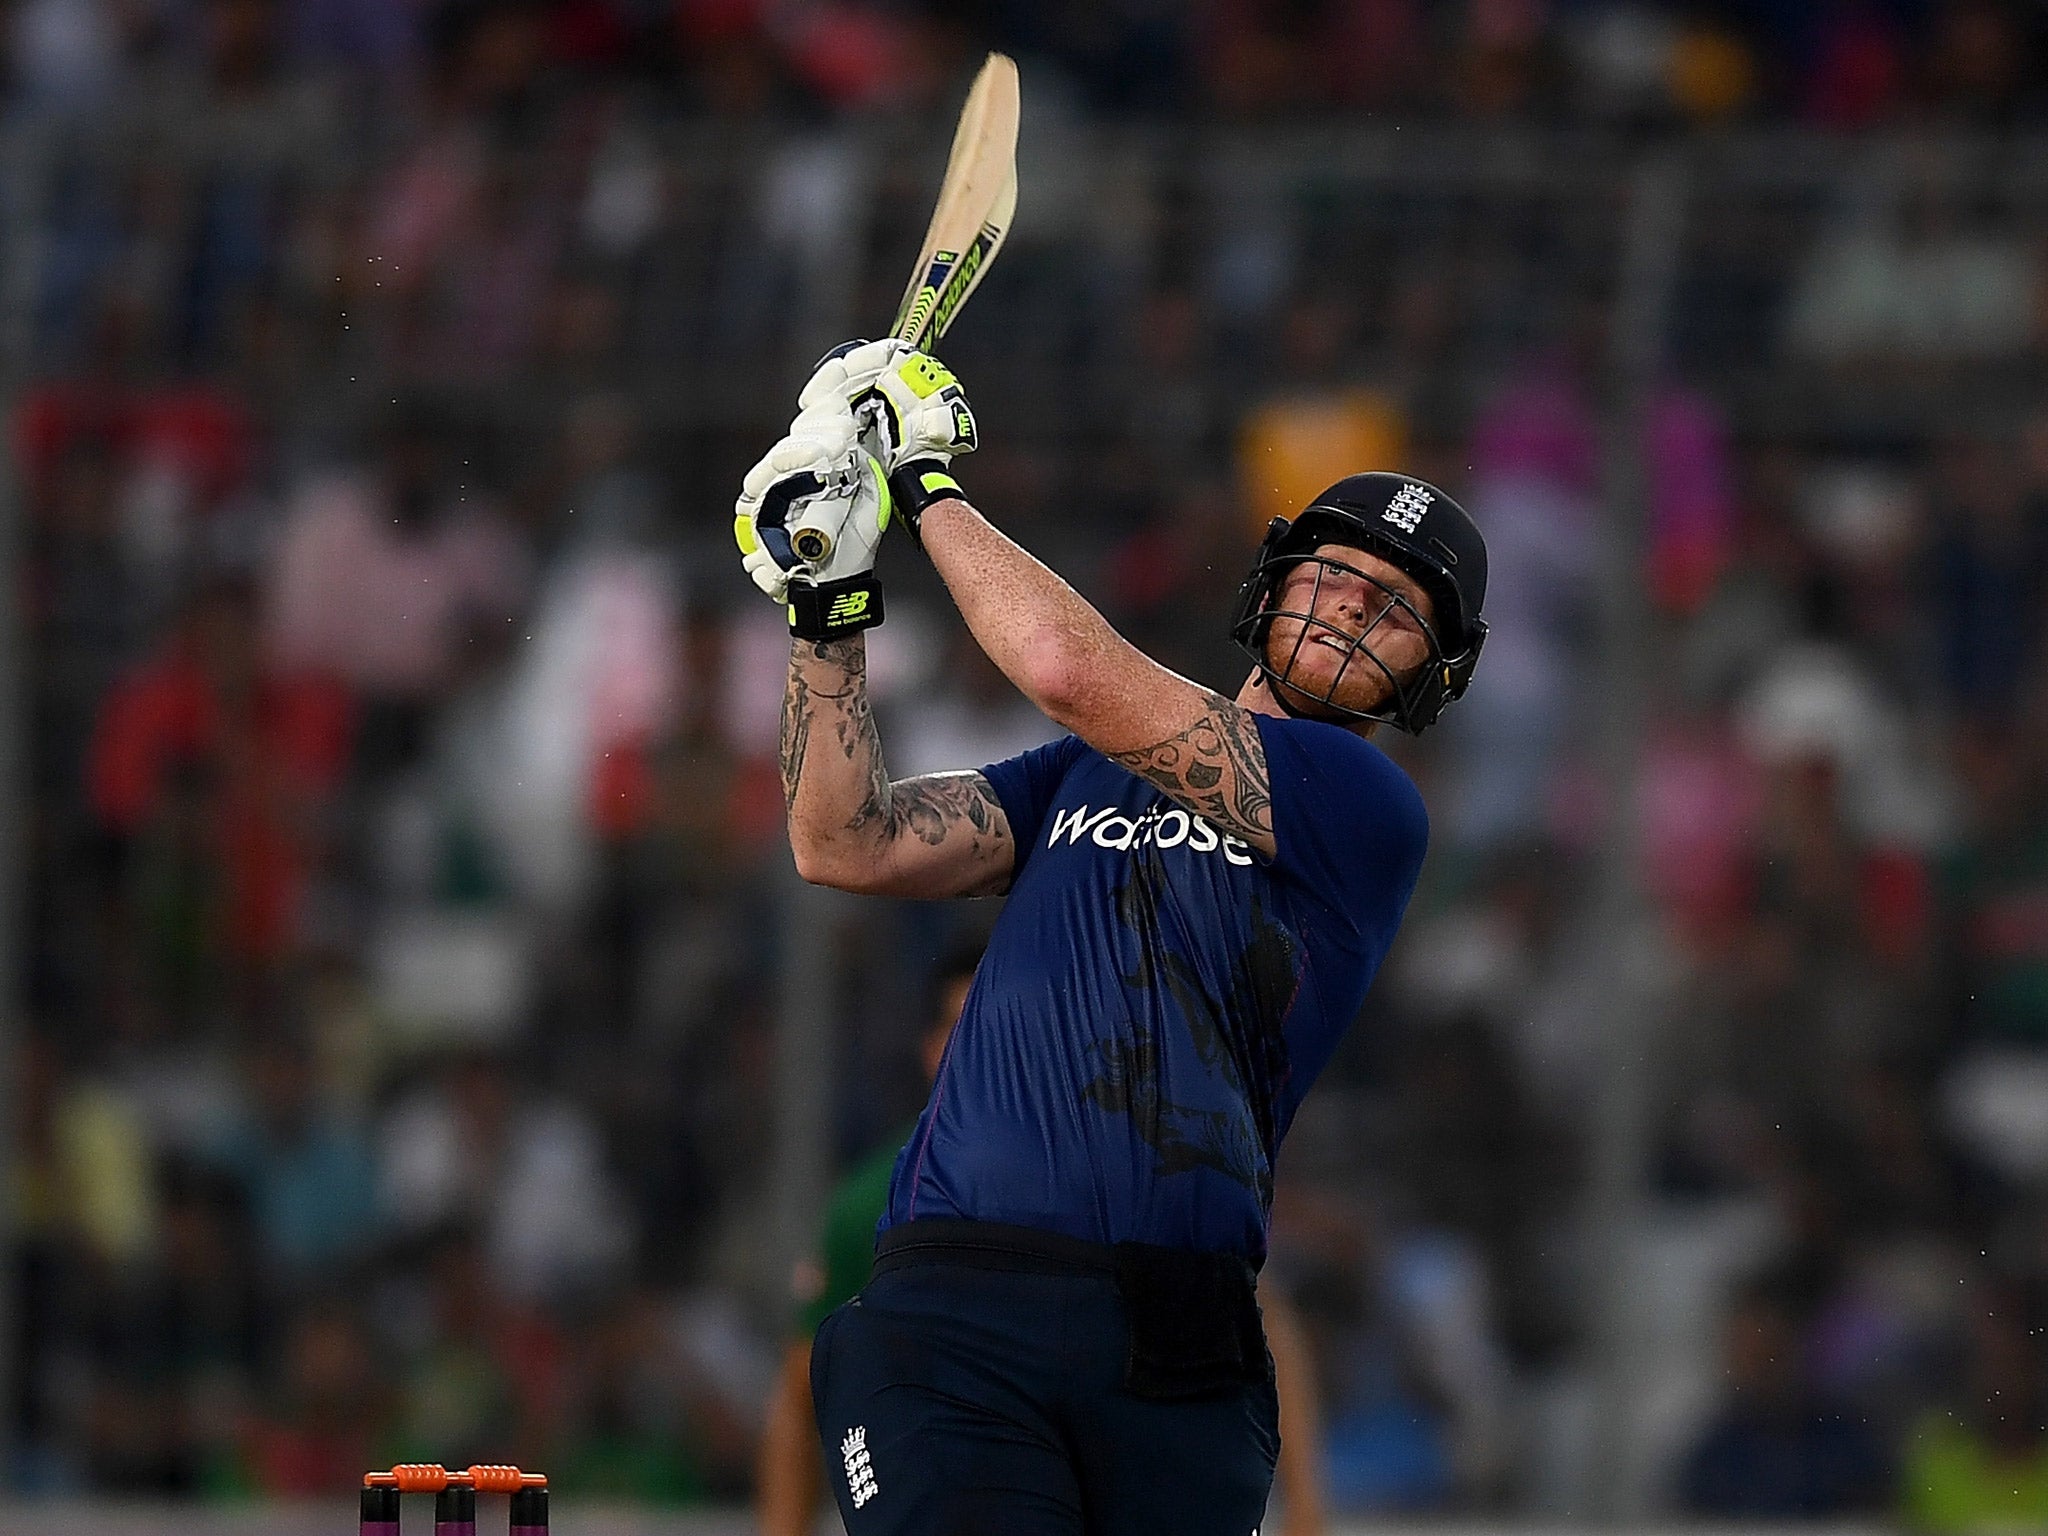 Stokes survived two dropped catches on his way to 101